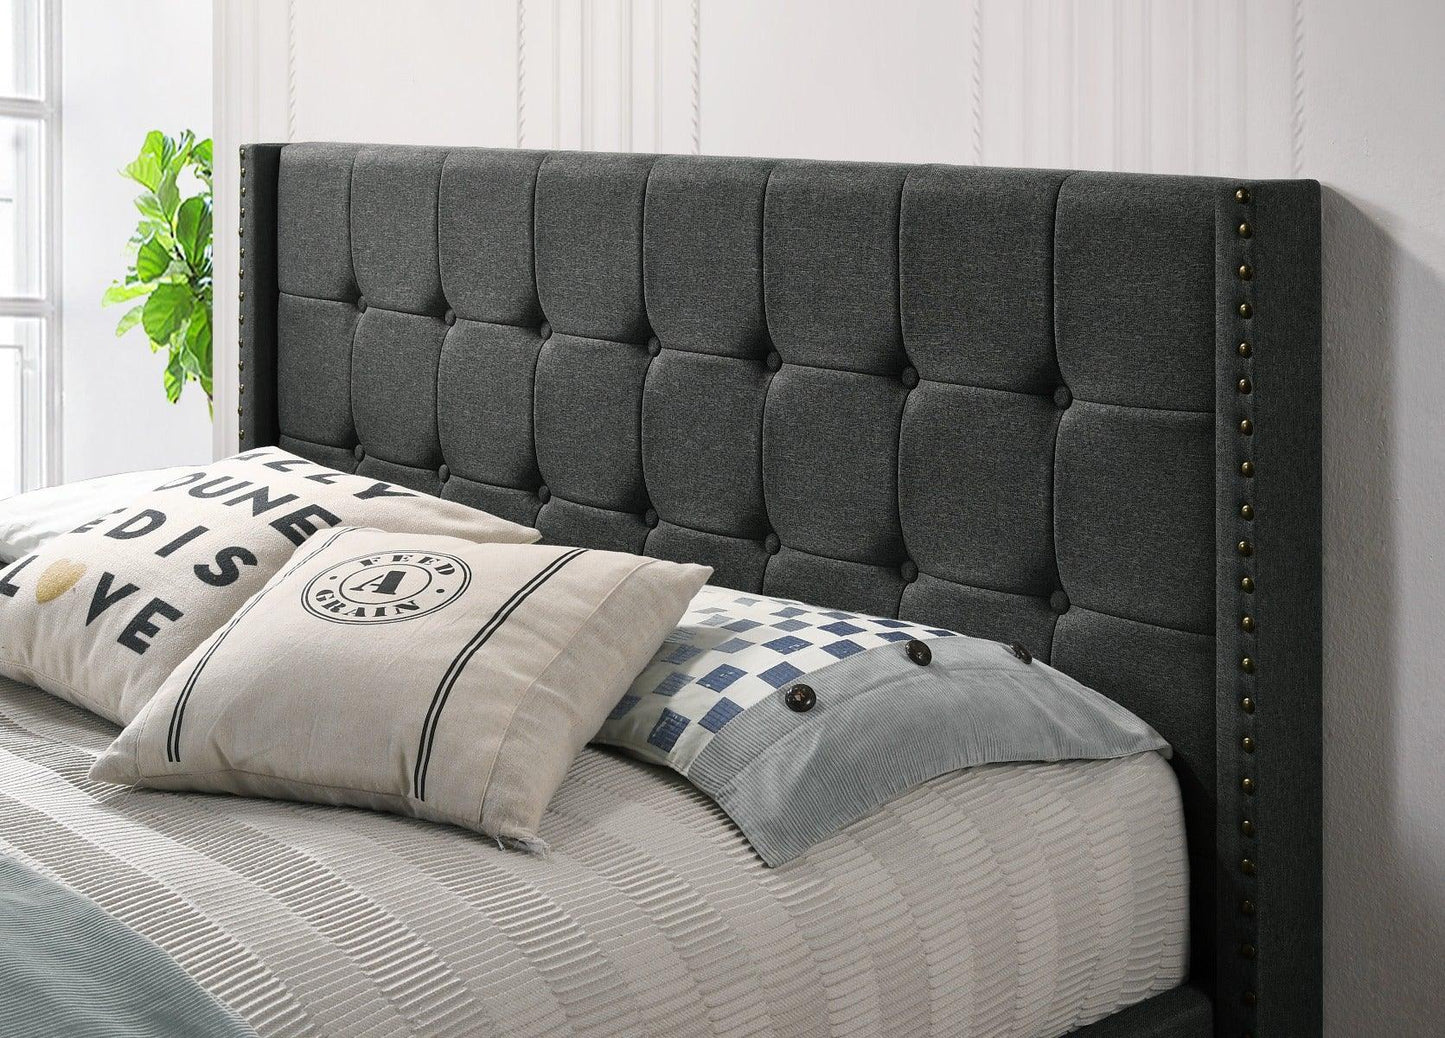 Queen Sized Winged Fabric Bed Frame with Gas Lift Storage in Charcoal